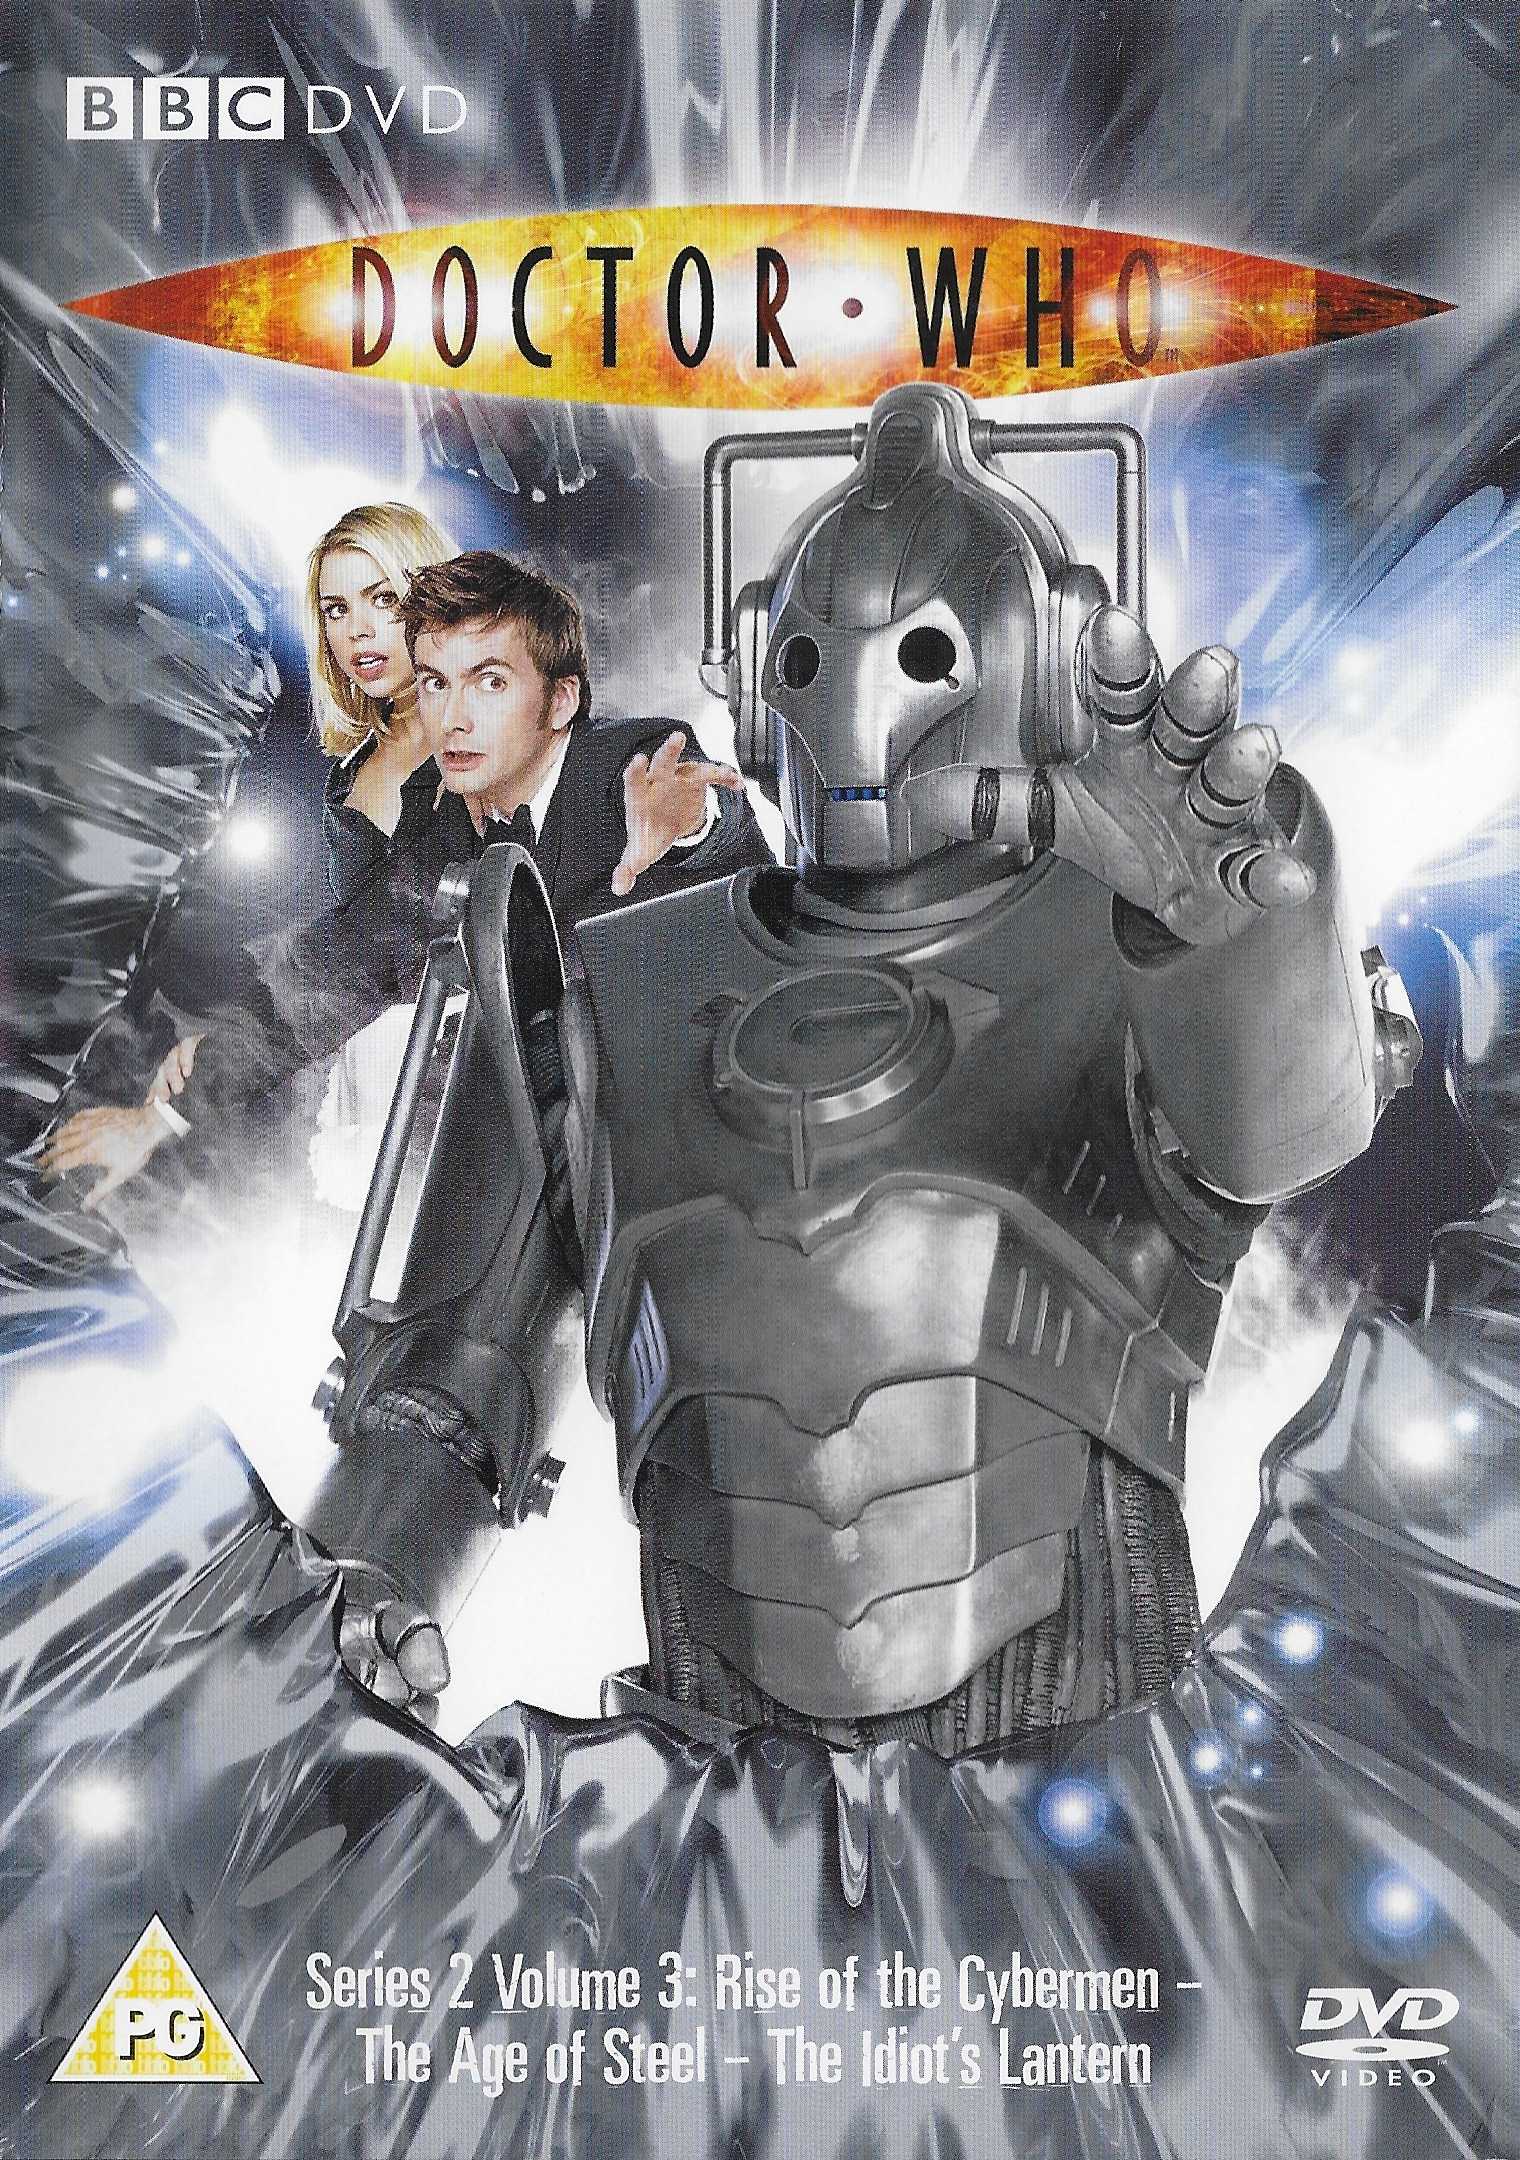 Picture of BBCDVD 1962 Doctor Who - Series 2, volume 3 by artist Tom MacRae / Mark Gatiss from the BBC records and Tapes library